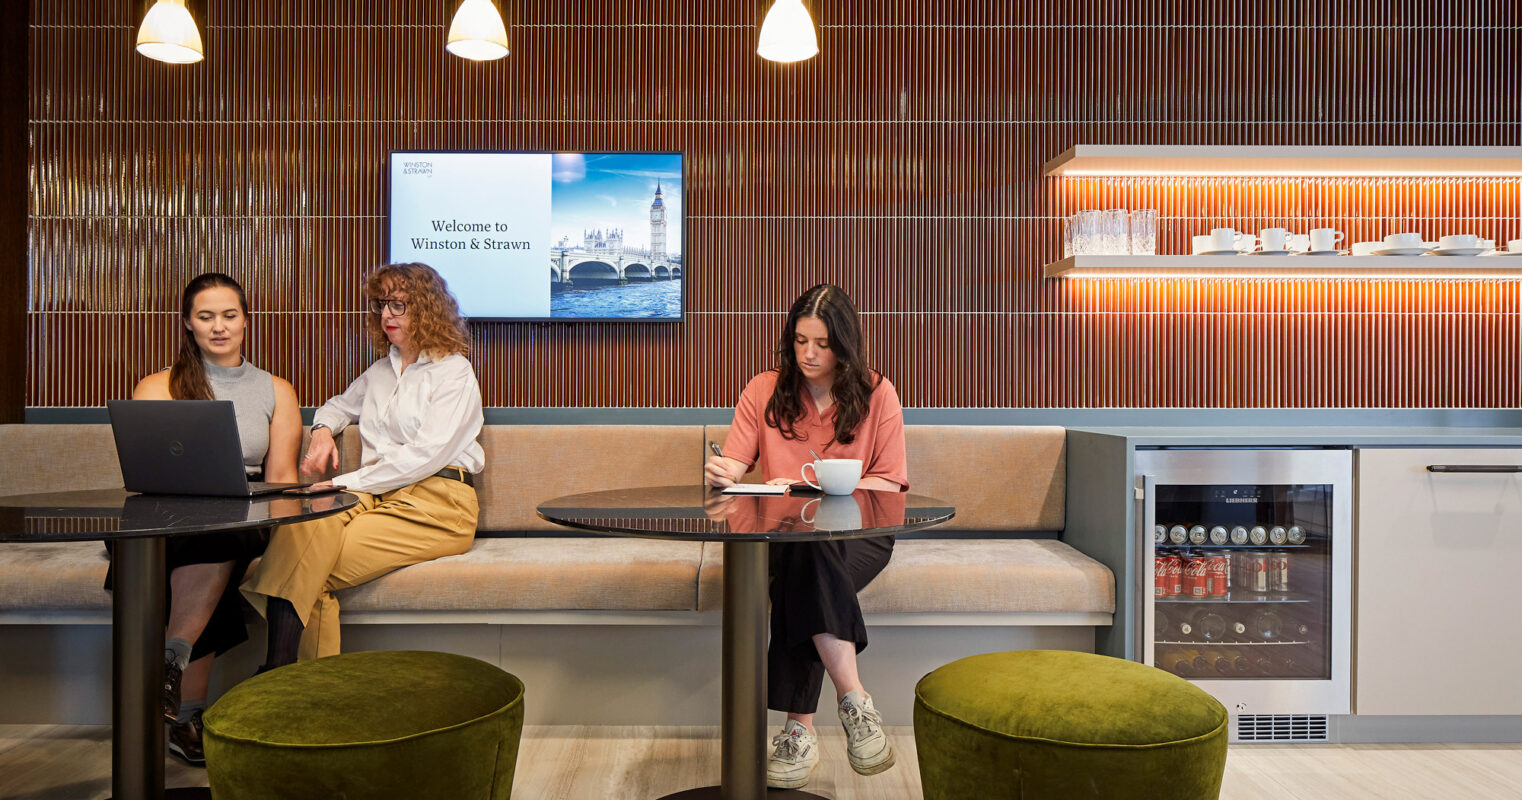 Modern office lounge with a warm wooden slat wall, complemented by sleek hanging pendant lights. A digital welcome sign adds a corporate flair, while plush green ottomans offer casual seating, beside a tidy kitchenette with a beverage fridge.